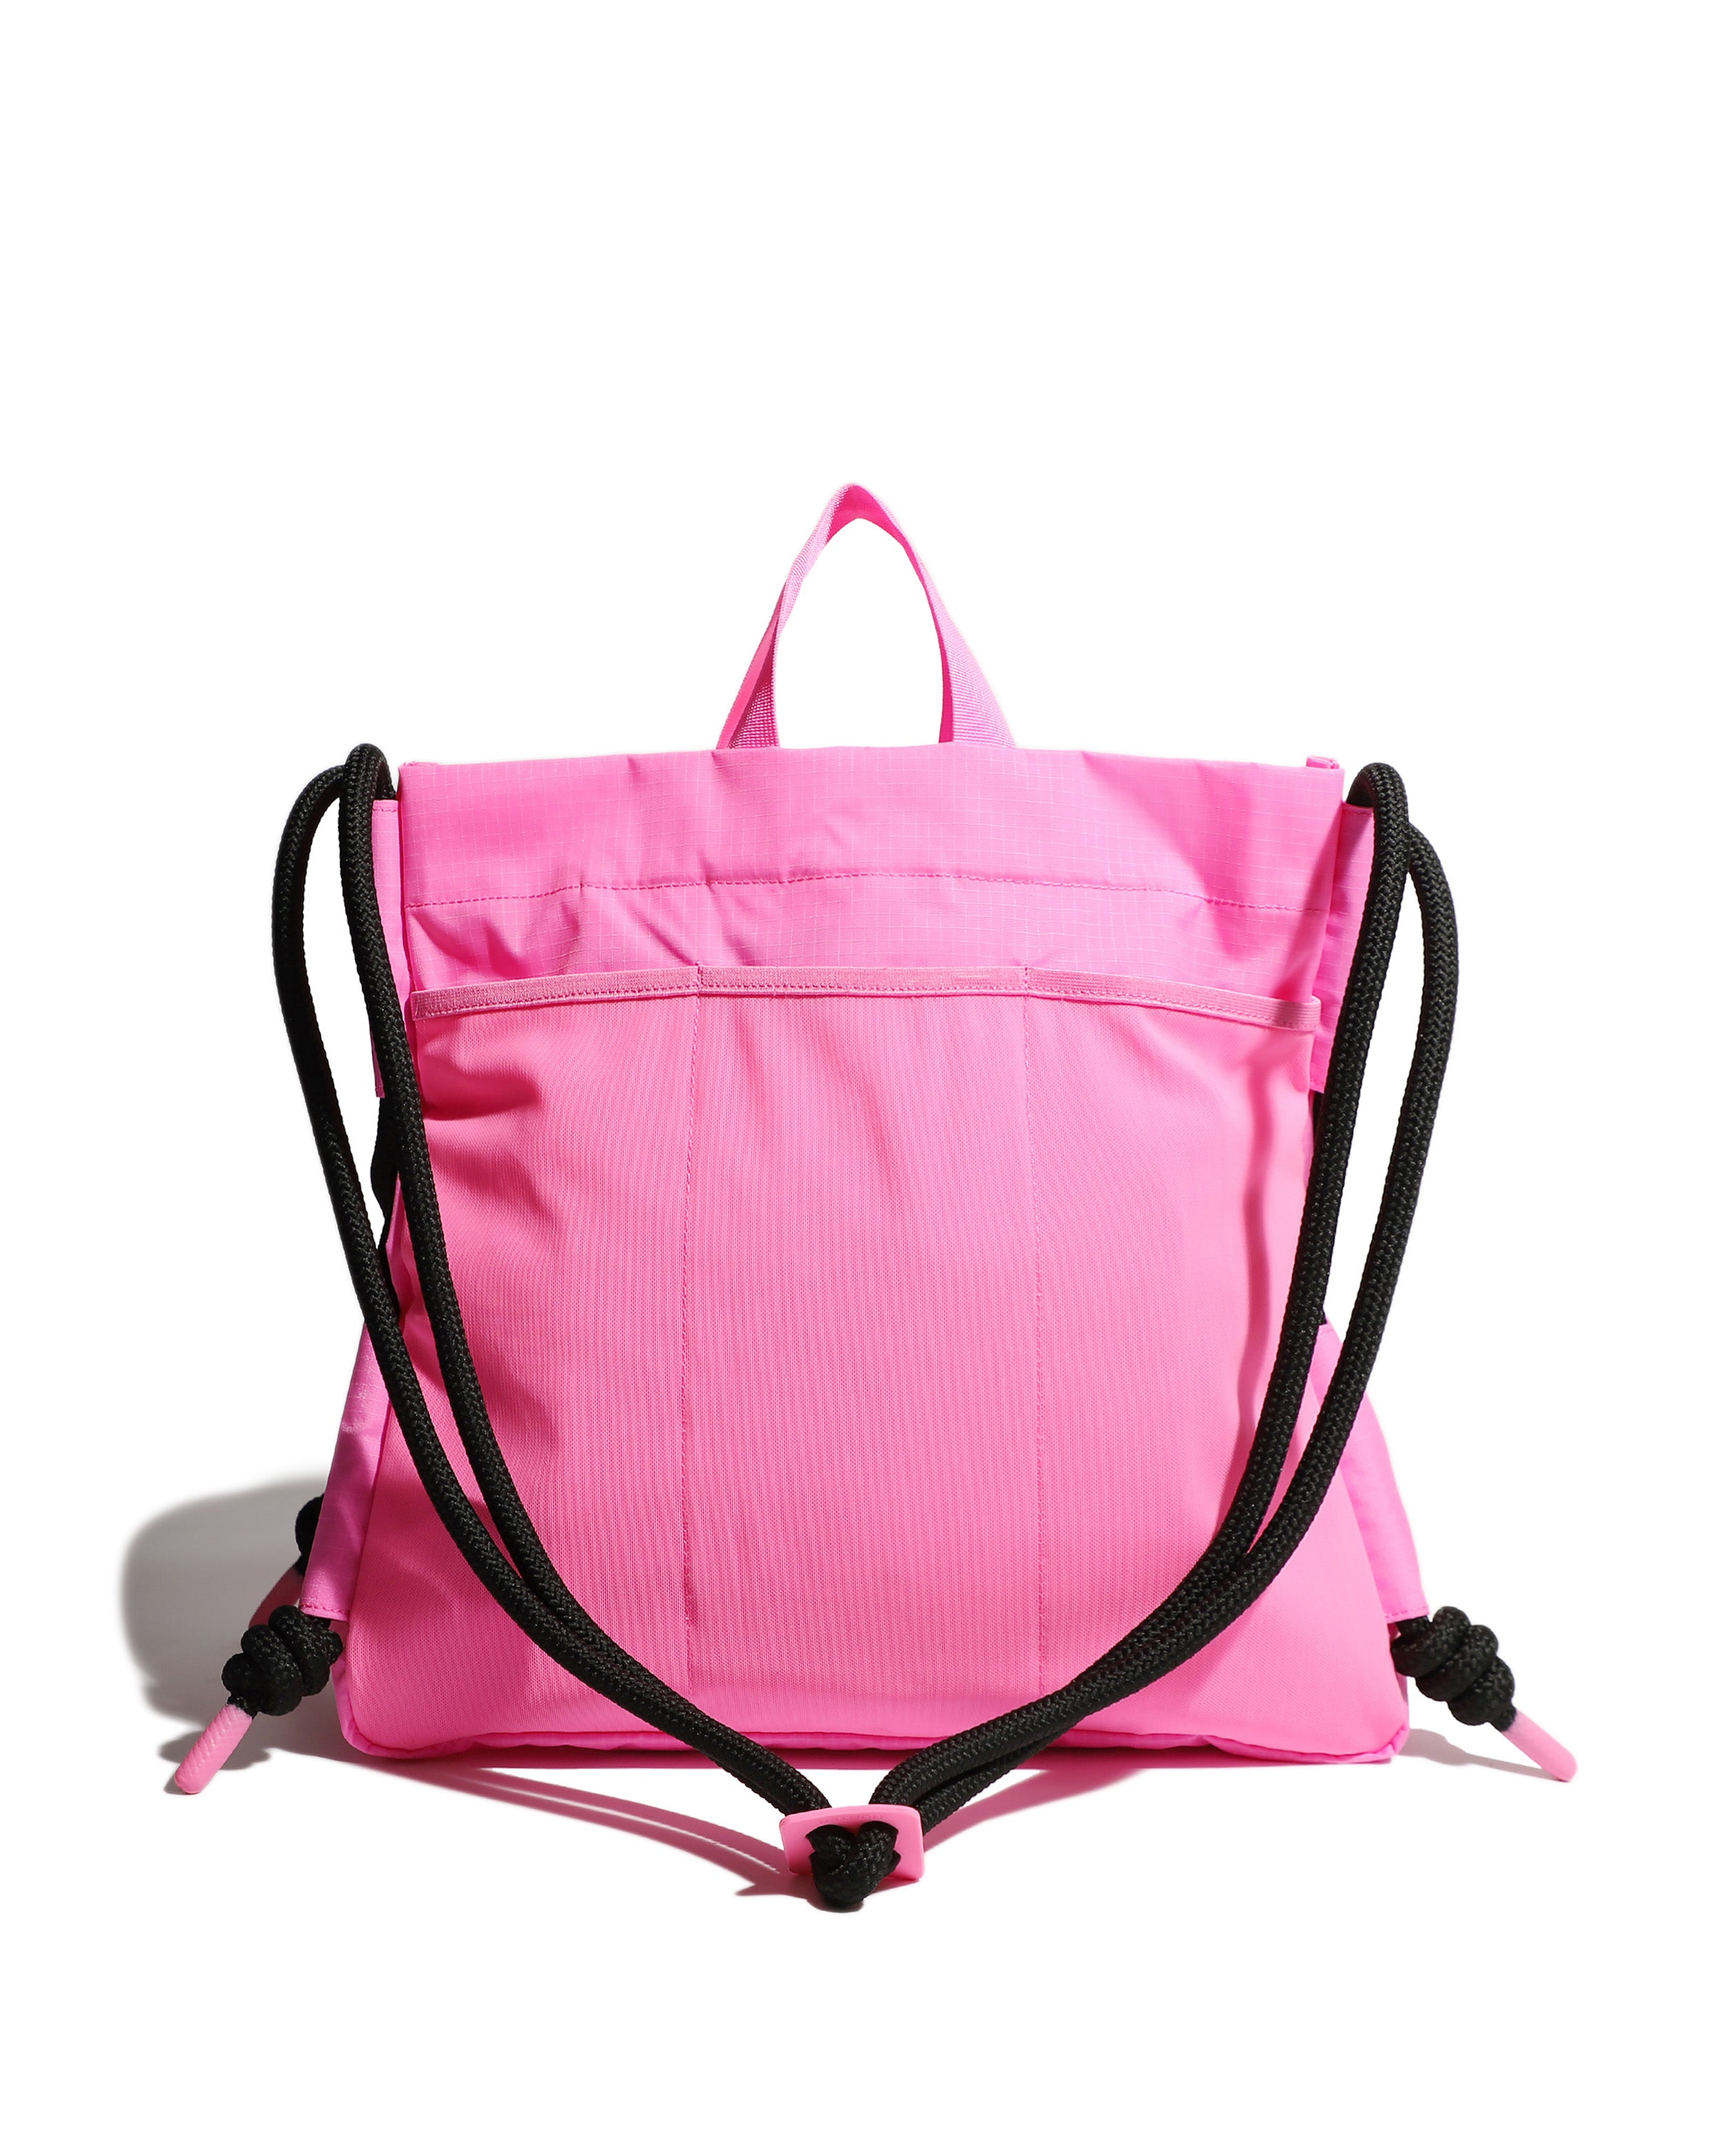 Travel Ripstop Recycled Nylon Tote Bag - Highlighter Pink